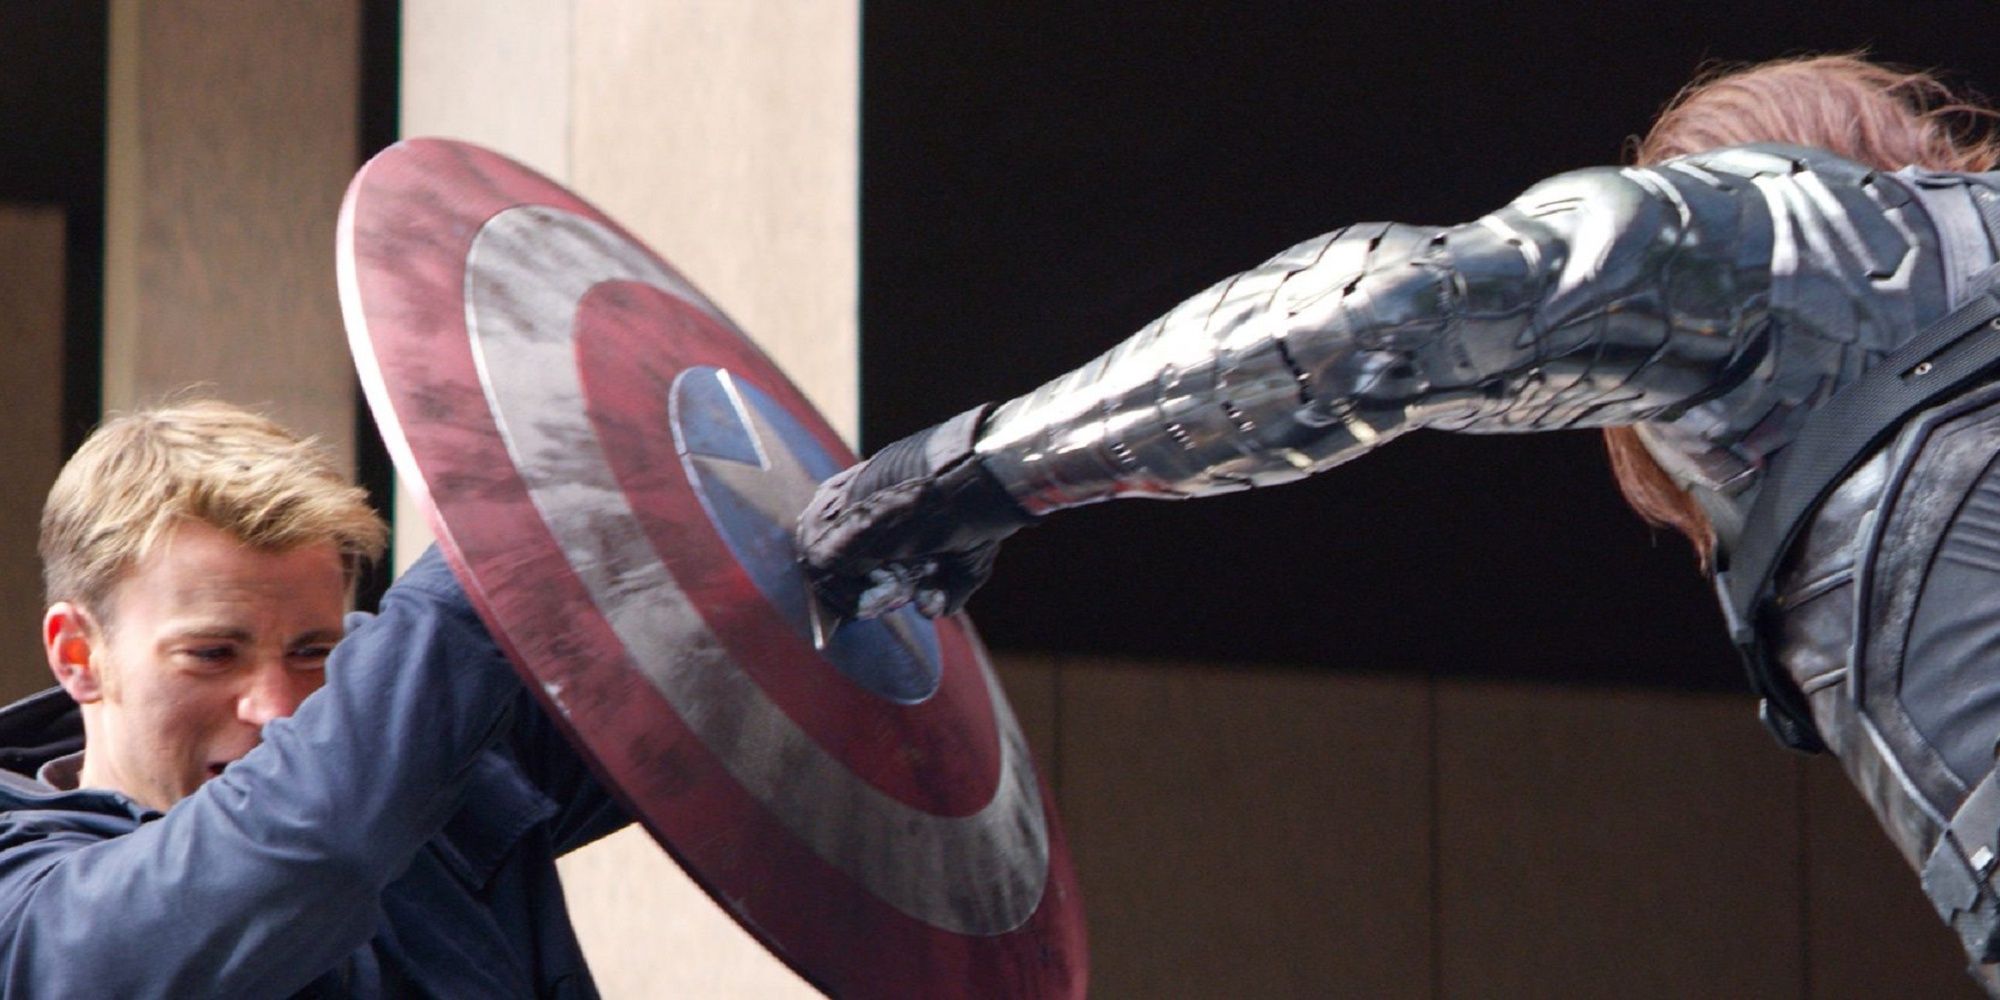 Captain America and The Winter Soldier fighting with shield.